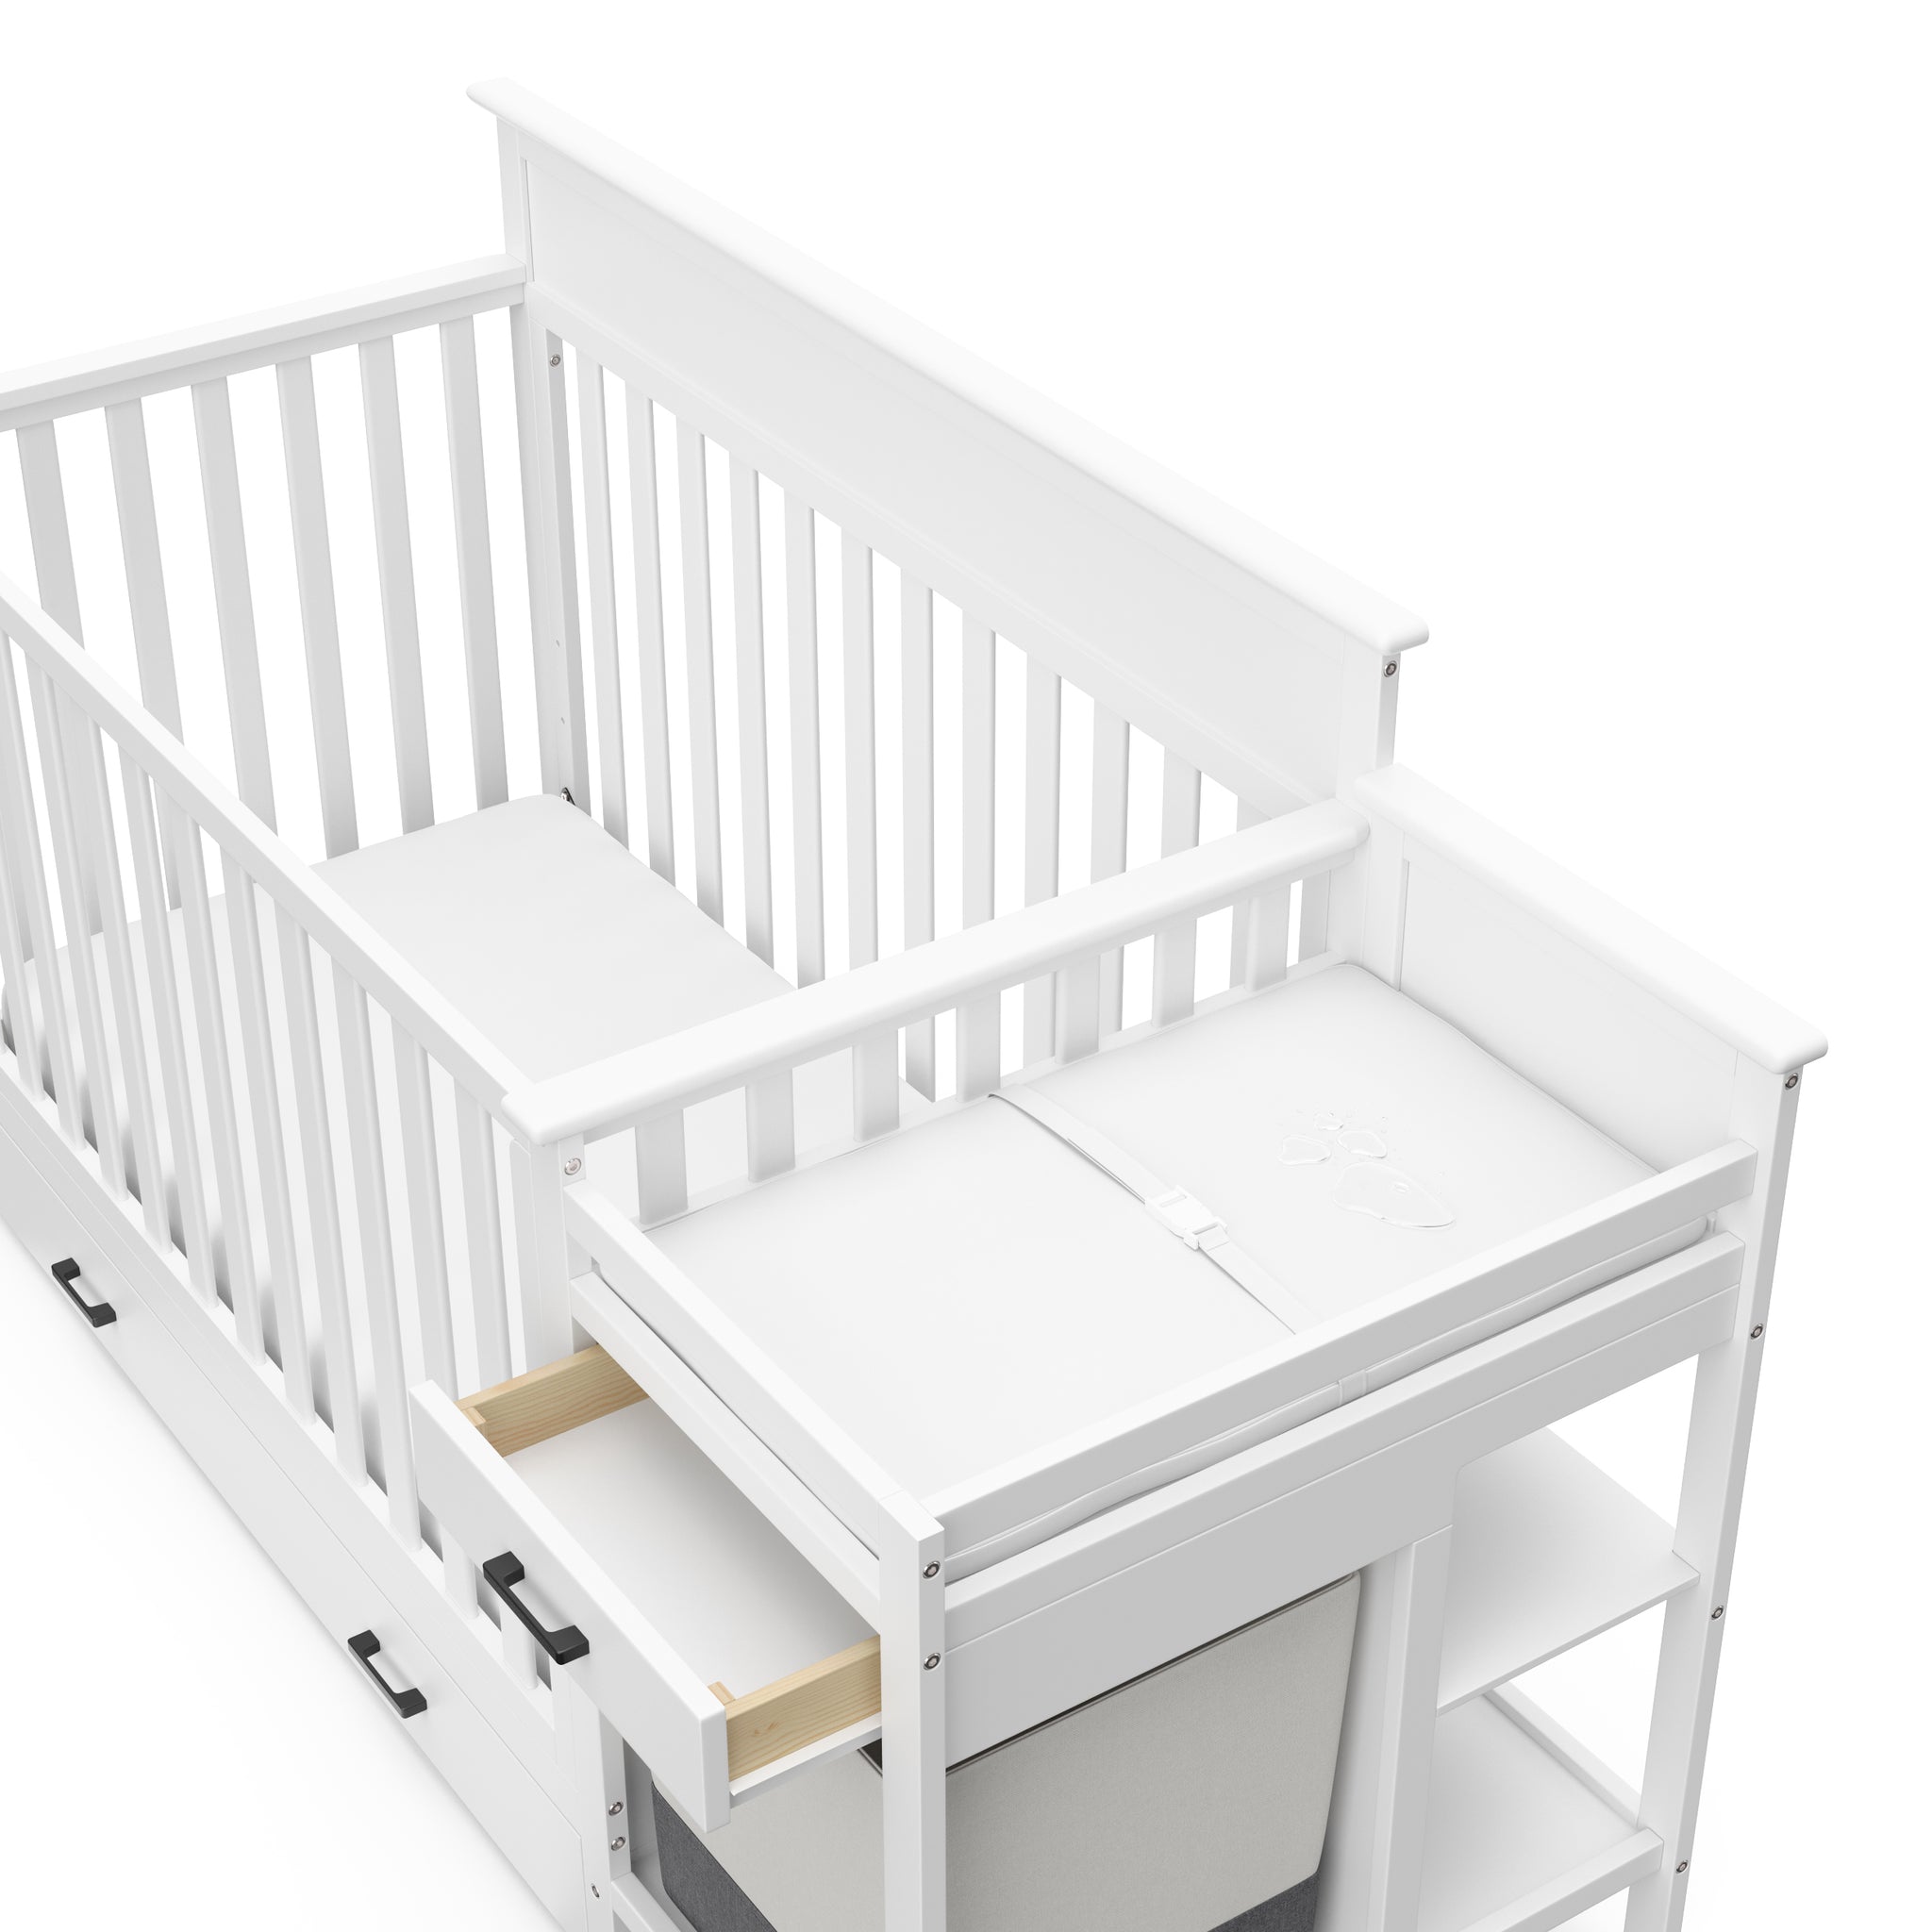 Close-up view of White crib and changer with open drawer